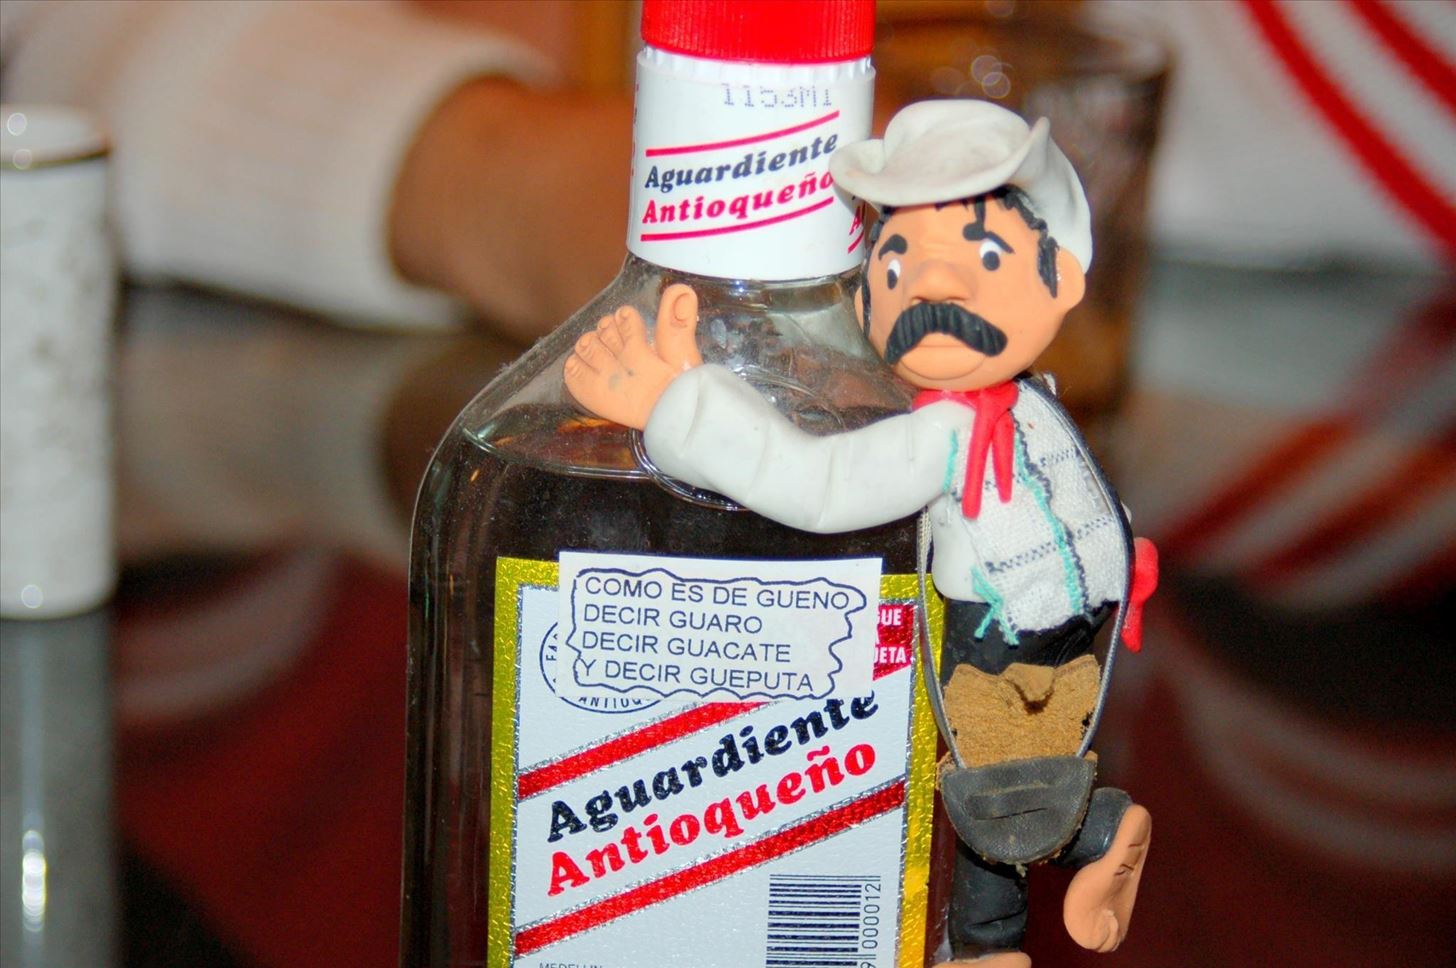 Why Cachaça, Pisco, & Aguardiente Are Must-Have Additions to Your Liquor Cabinet